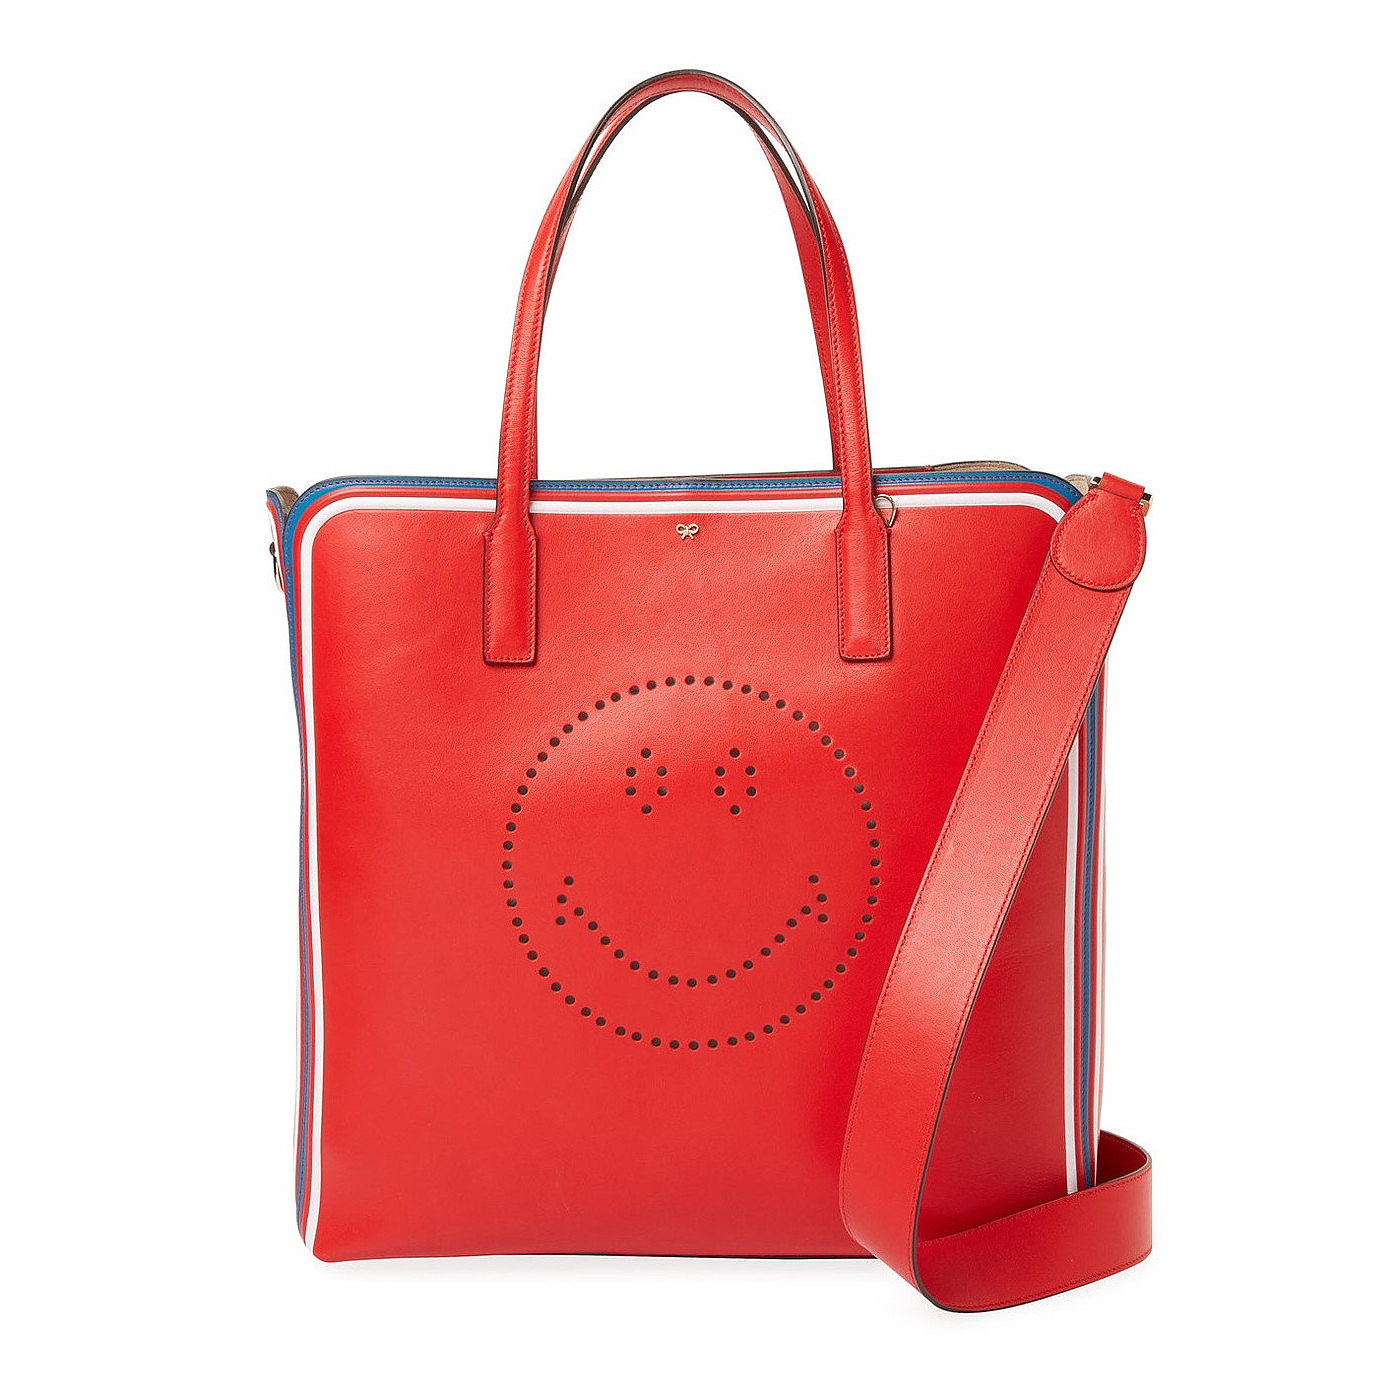 Anya Hindmarch Smiley Leather Tote Bag